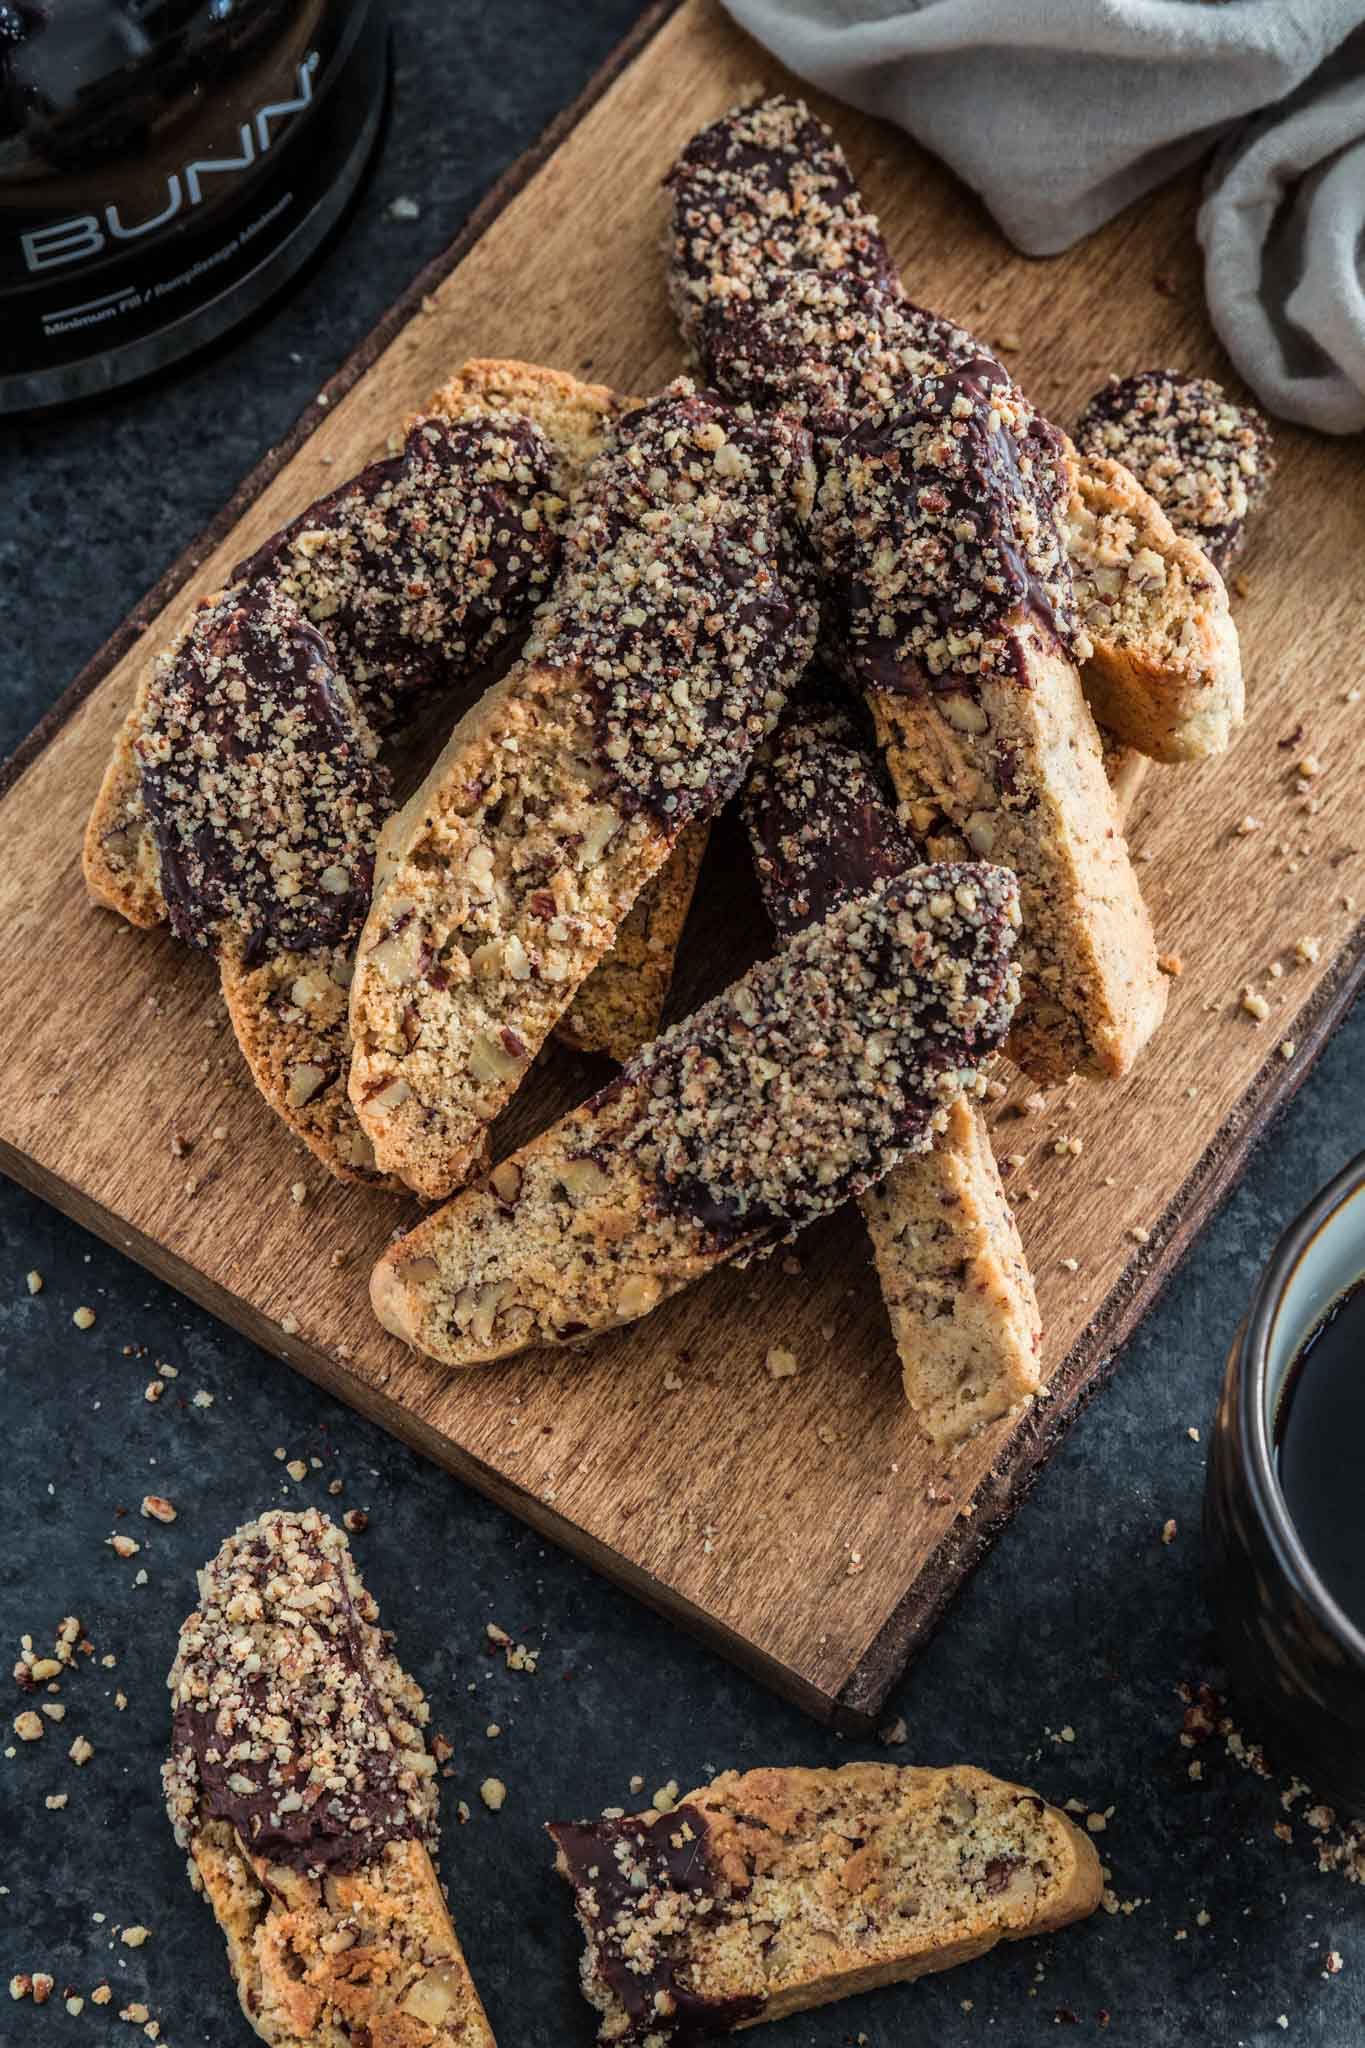 Chocolate Dipped Cinnamon Pecan Biscotti | www.oliviascuisine.com | Lighter than Italian biscotti, these Chocolate Dipped Cinnamon Pecan Biscotti are crisp, tender and filled with some of my favorite holiday noms: cinnamon, pecan and chocolate! Perfect to give out as holiday gifts or just to dunk into your coffee. 